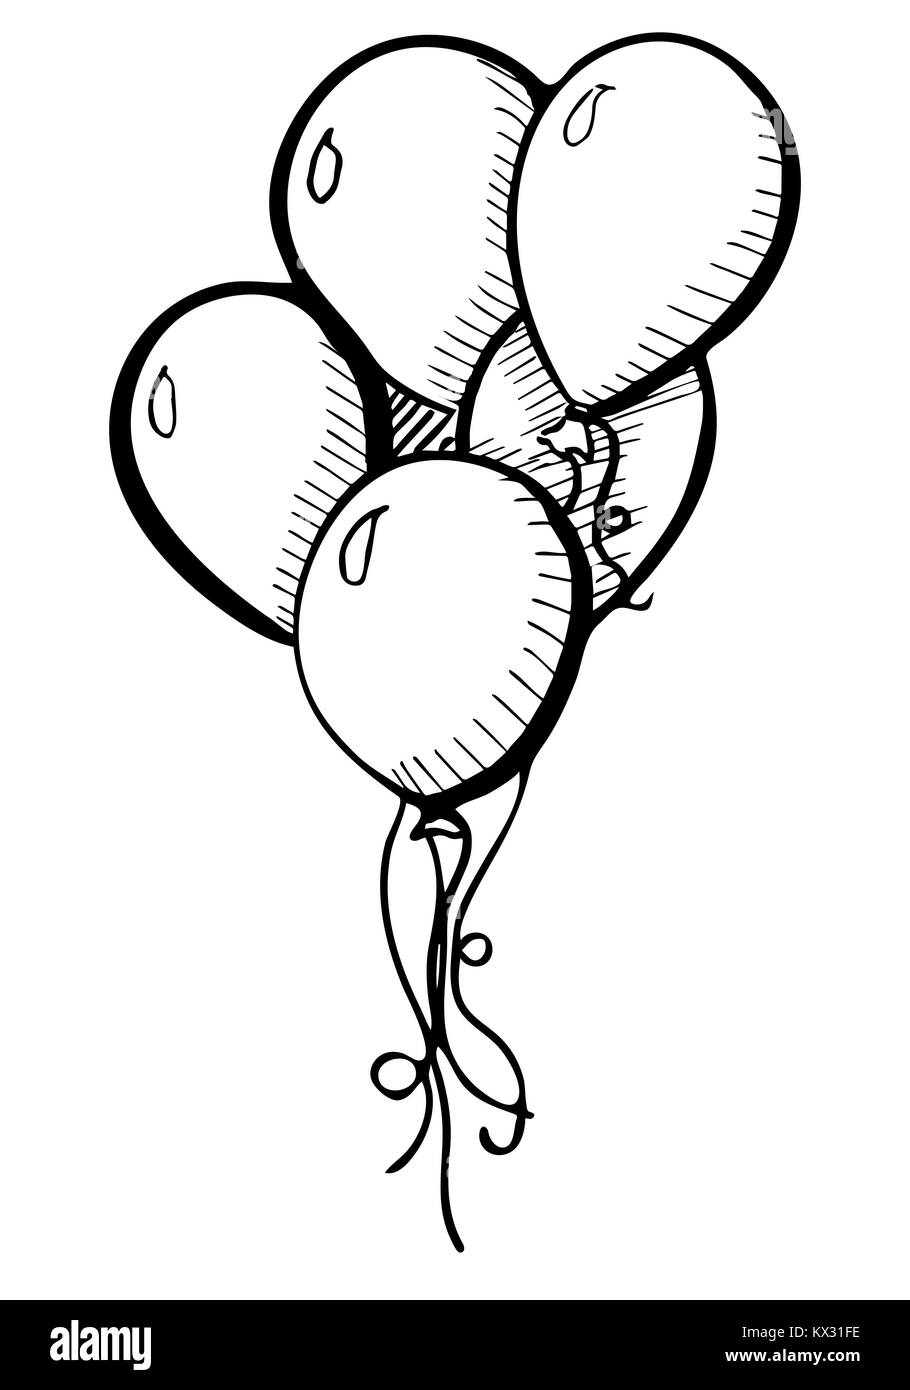 Group of balloons on a string. Hand drawn, isolated on a white